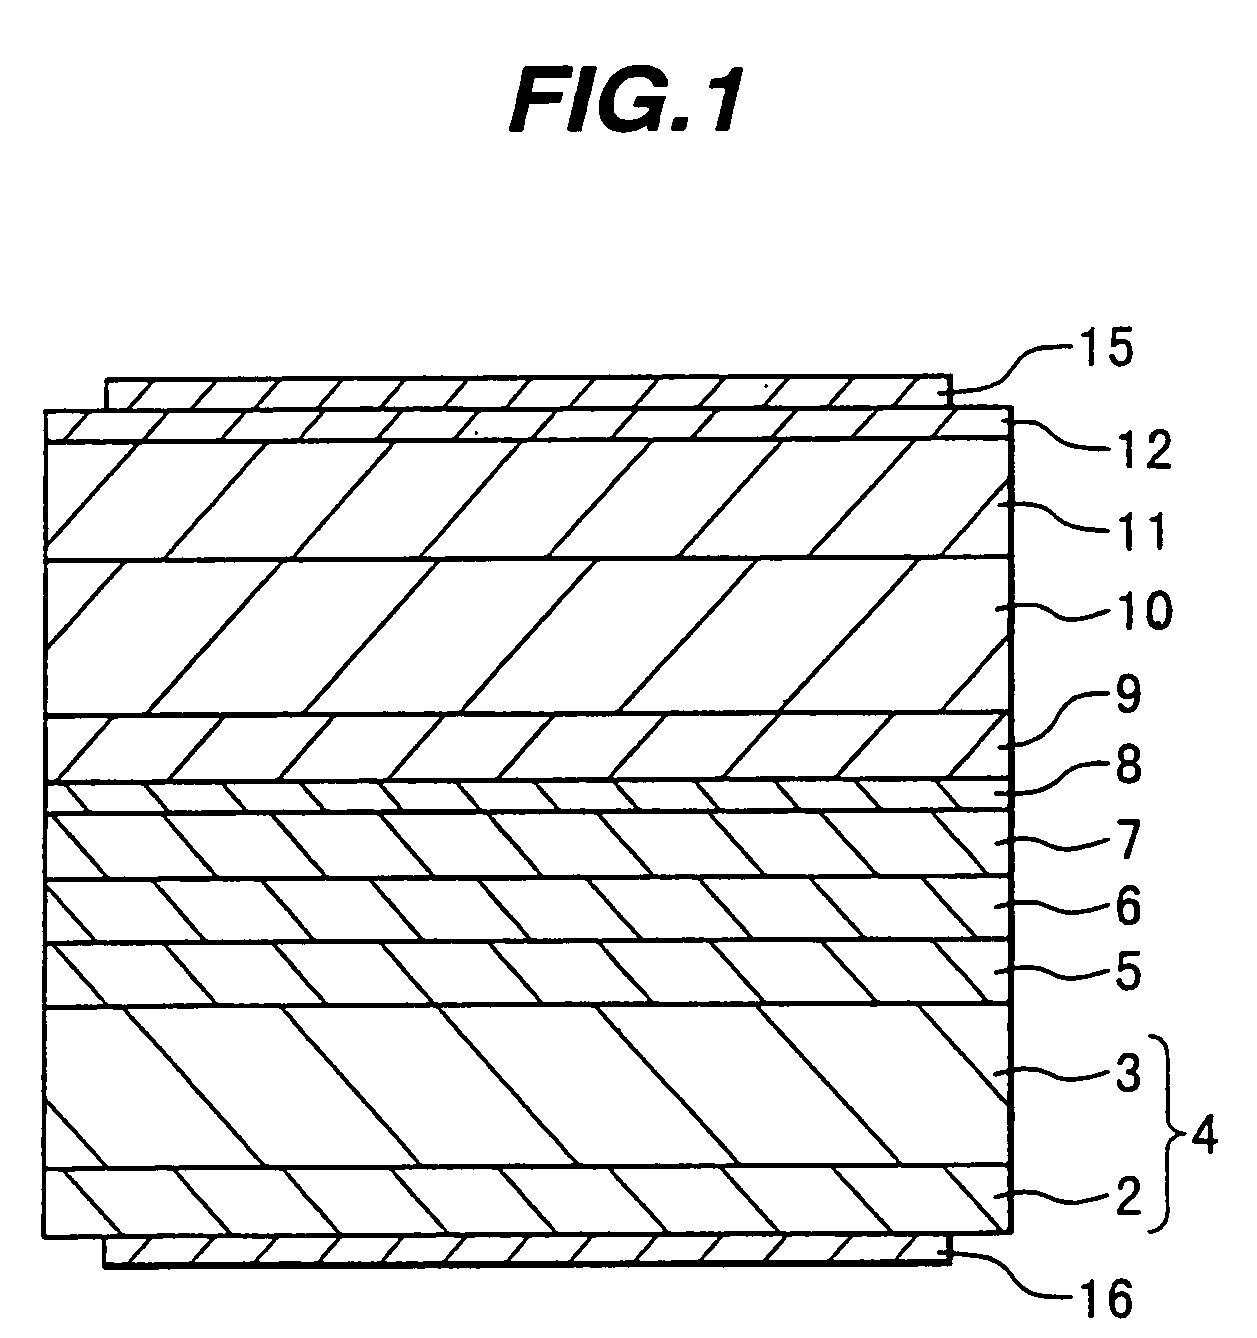 Semiconductor light emitting device having quantum well layer sandwiched between carrier confinement layers